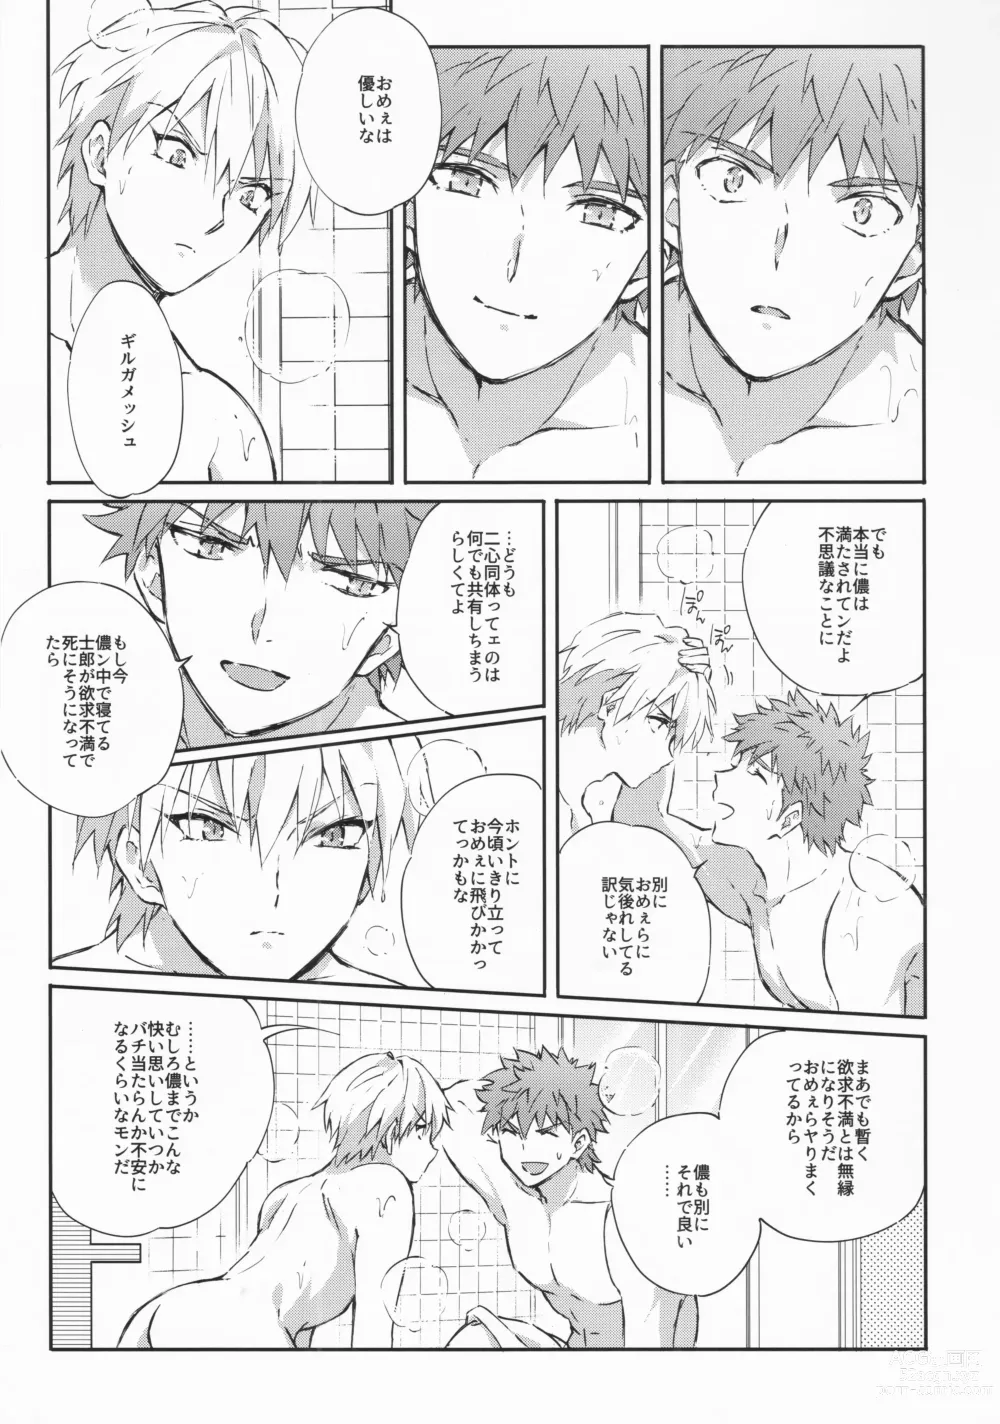 Page 44 of doujinshi STARDUST LOVESONG encore special story 1st After 7 Days